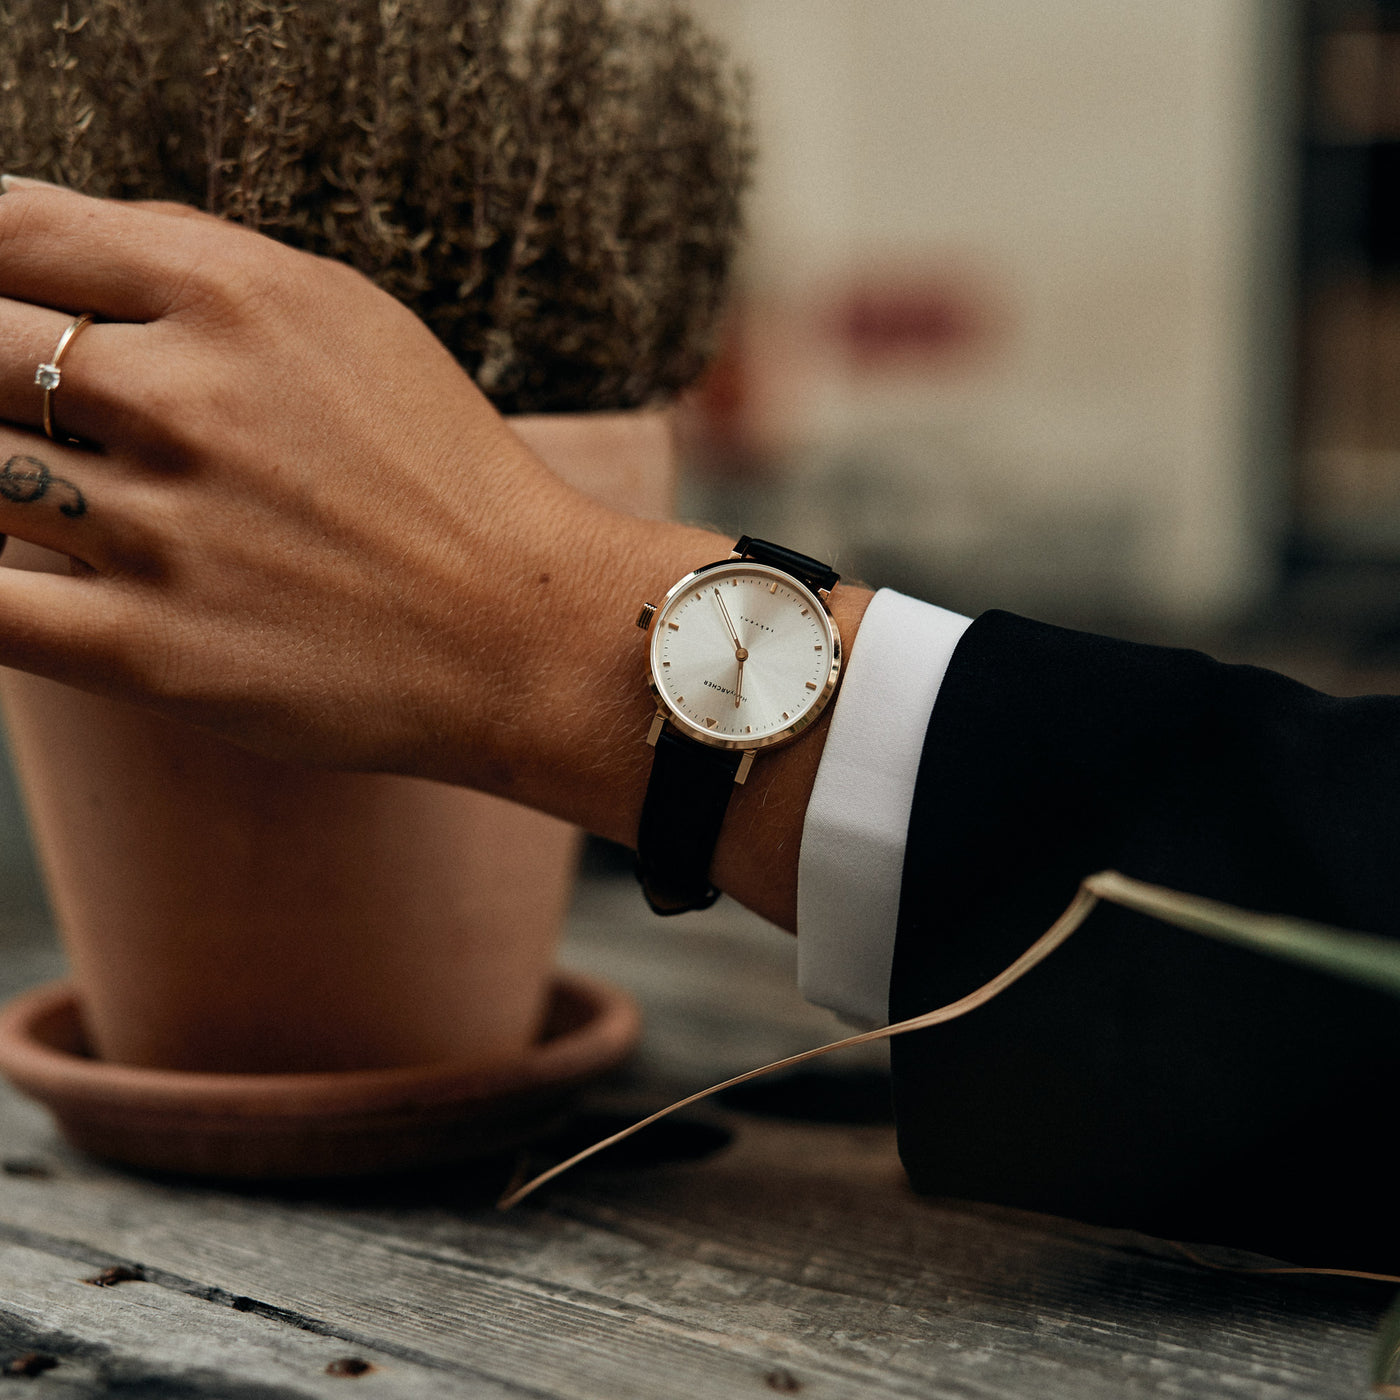 Our take on the perfect women’s watch.